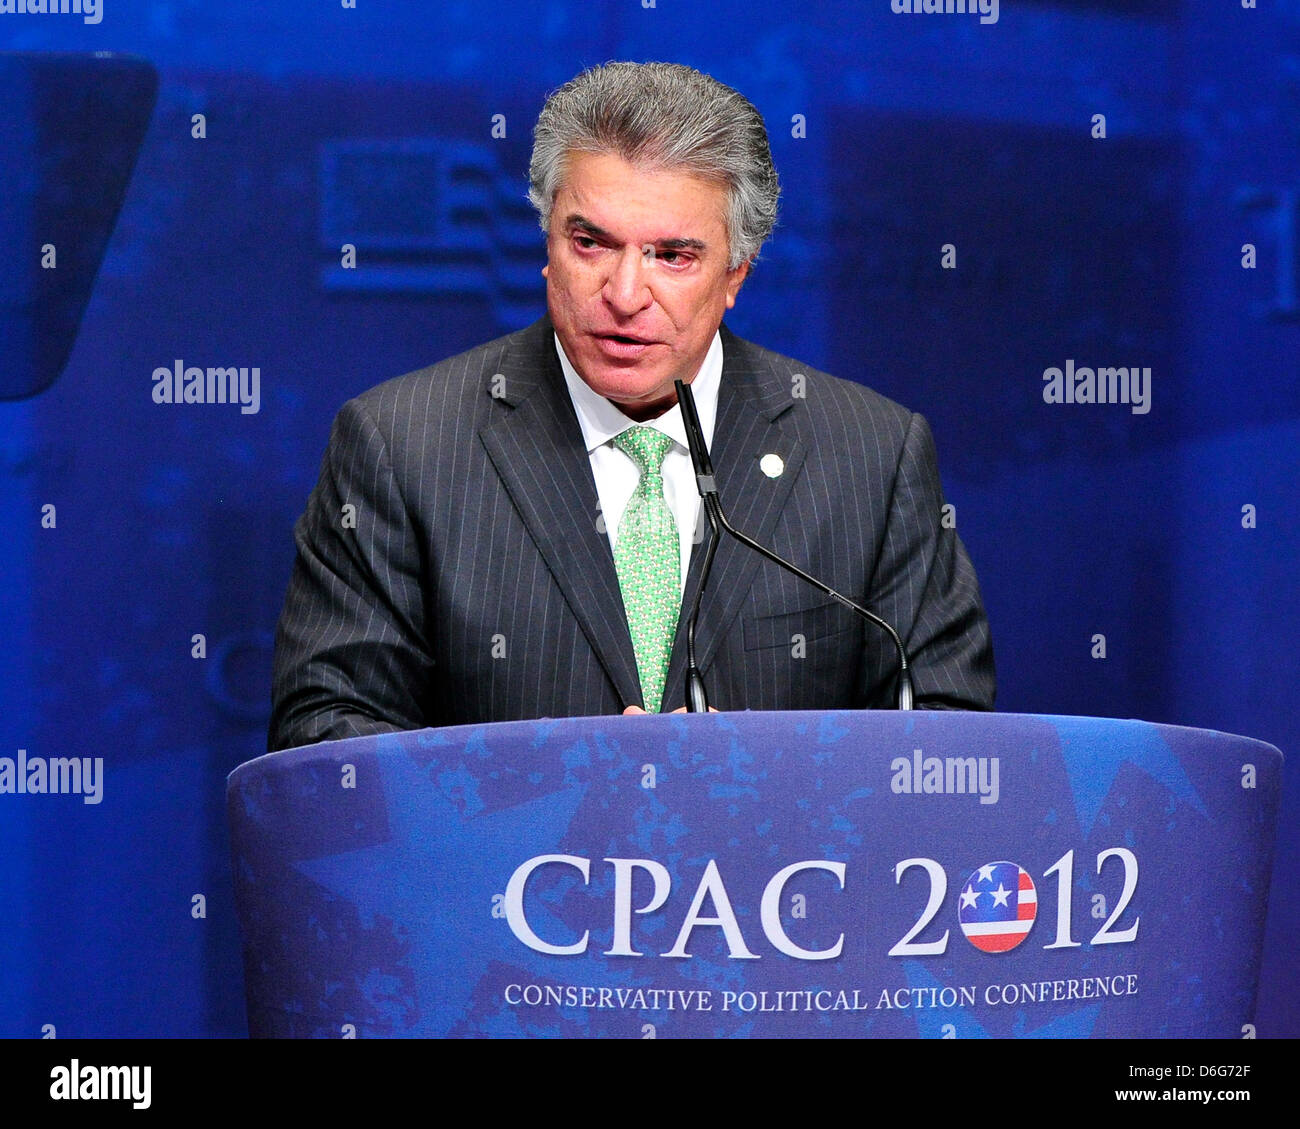 Al Cardenas, Chairman, the American Conservative Union, introduces former Governor Mitt Romney (Republican of Massachusetts), a candidate for the 2012 Republican Party nomination for President of the United States, at the 2012 CPAC Conference at the Marriott Wardman Park Hotel in Washington, D.C. on Friday, February 10, 2012..Credit: Ron Sachs / CNP Stock Photo